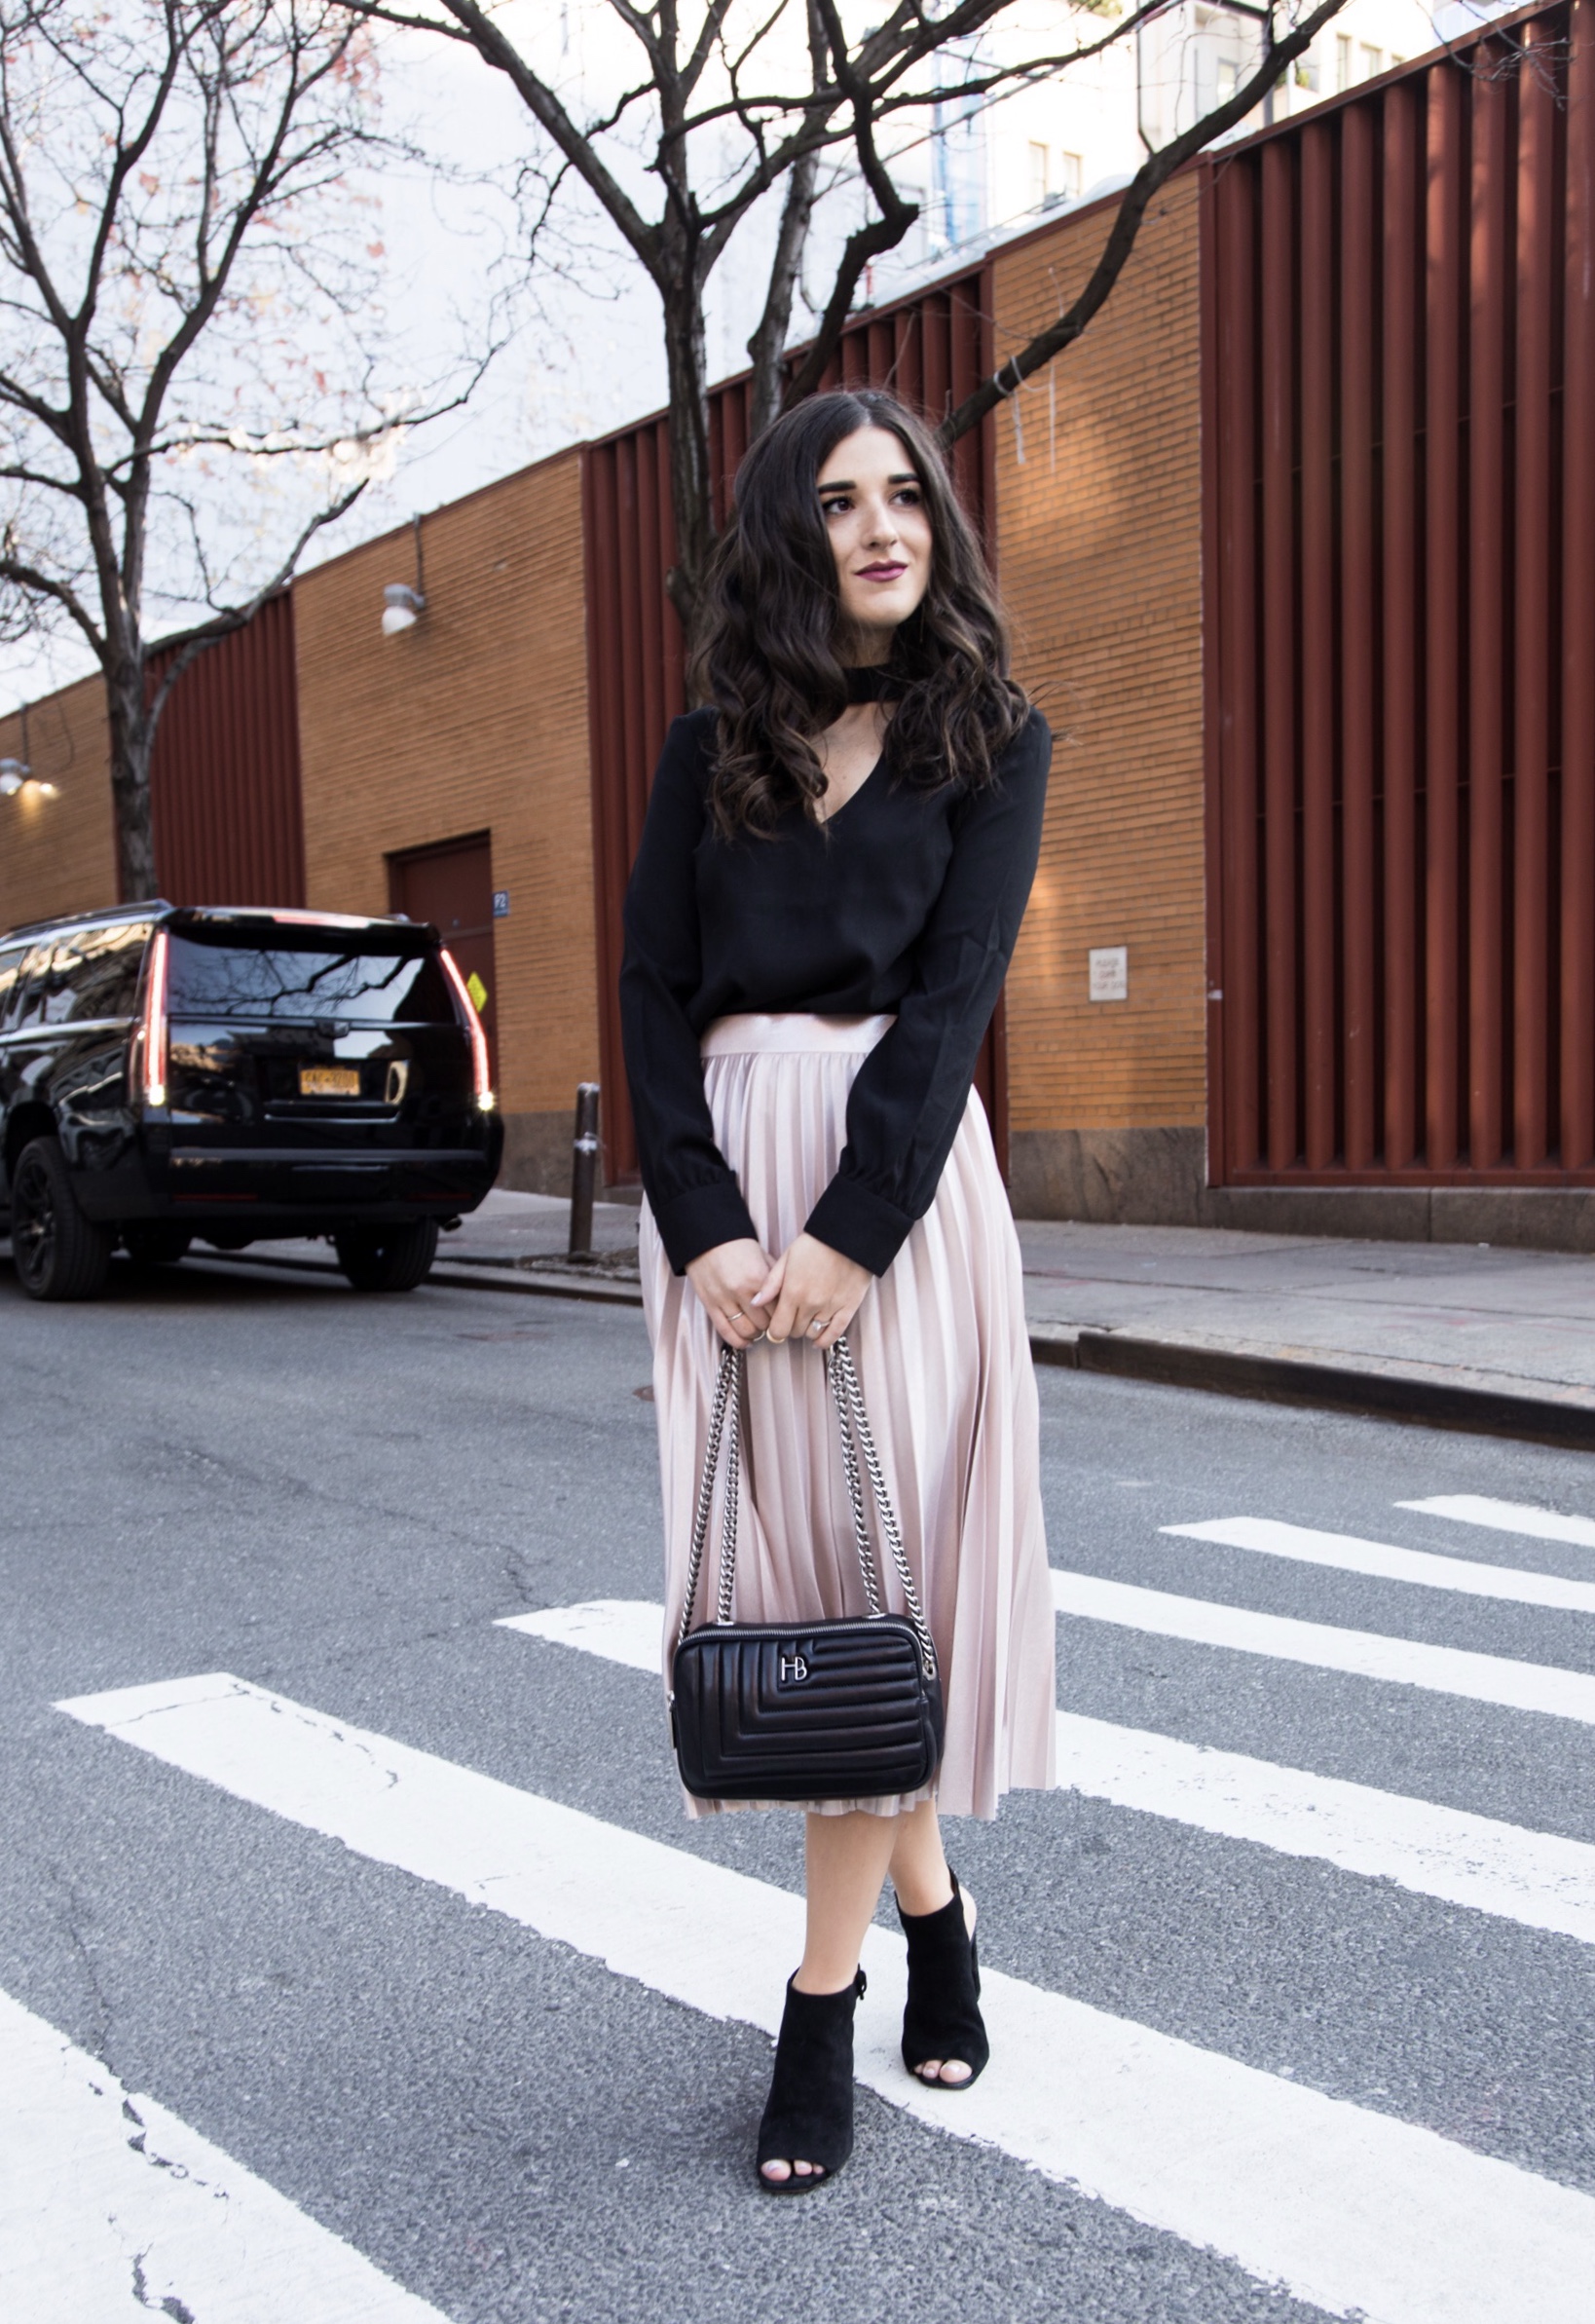 Metallic Midi Skirt Black Cutout Top How I Pack In A Carry On Esther Santer Fashion Blog NYC Street Style Blogger Outfit OOTD Trendy Feminine Girly Spring Hairstyle Waves Travel Tips Honeymoon Photshoot Pose Wearing Shop Peep Toe  Booties Henri Bendel.jpg